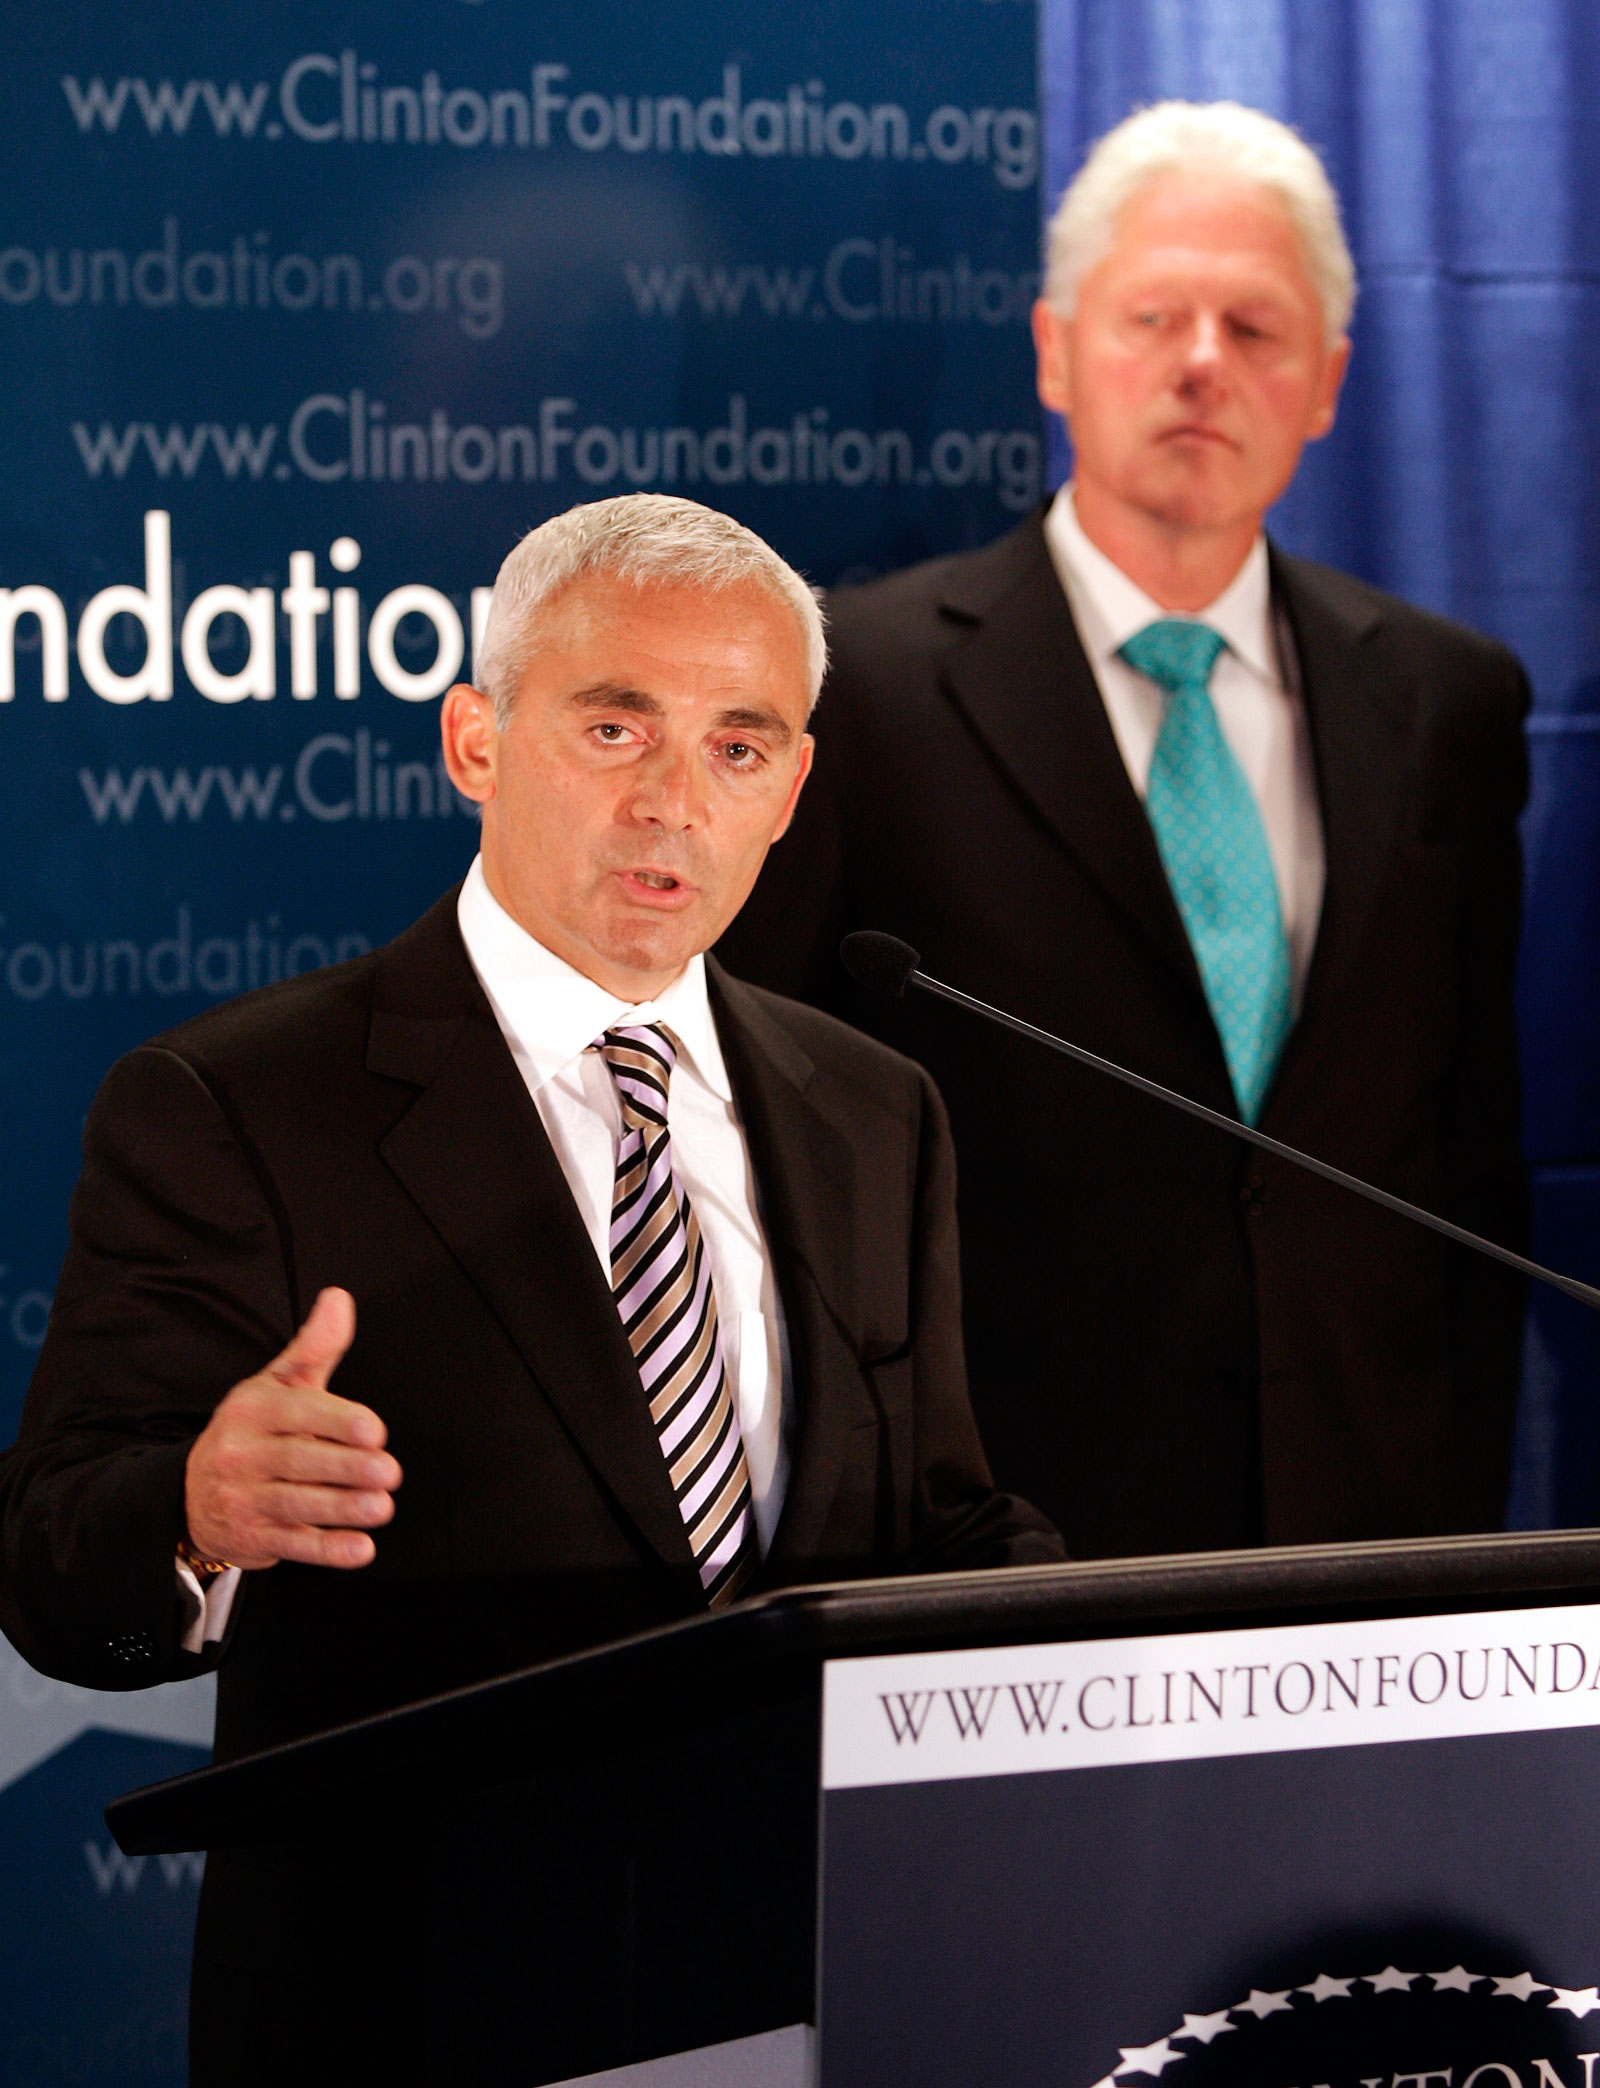 Frank Giustra speaks as former President Bill Clinton looks on during a press conference announcing the Clinton Giustra Sustainable Growth Initiative, New York, June 21, 2007